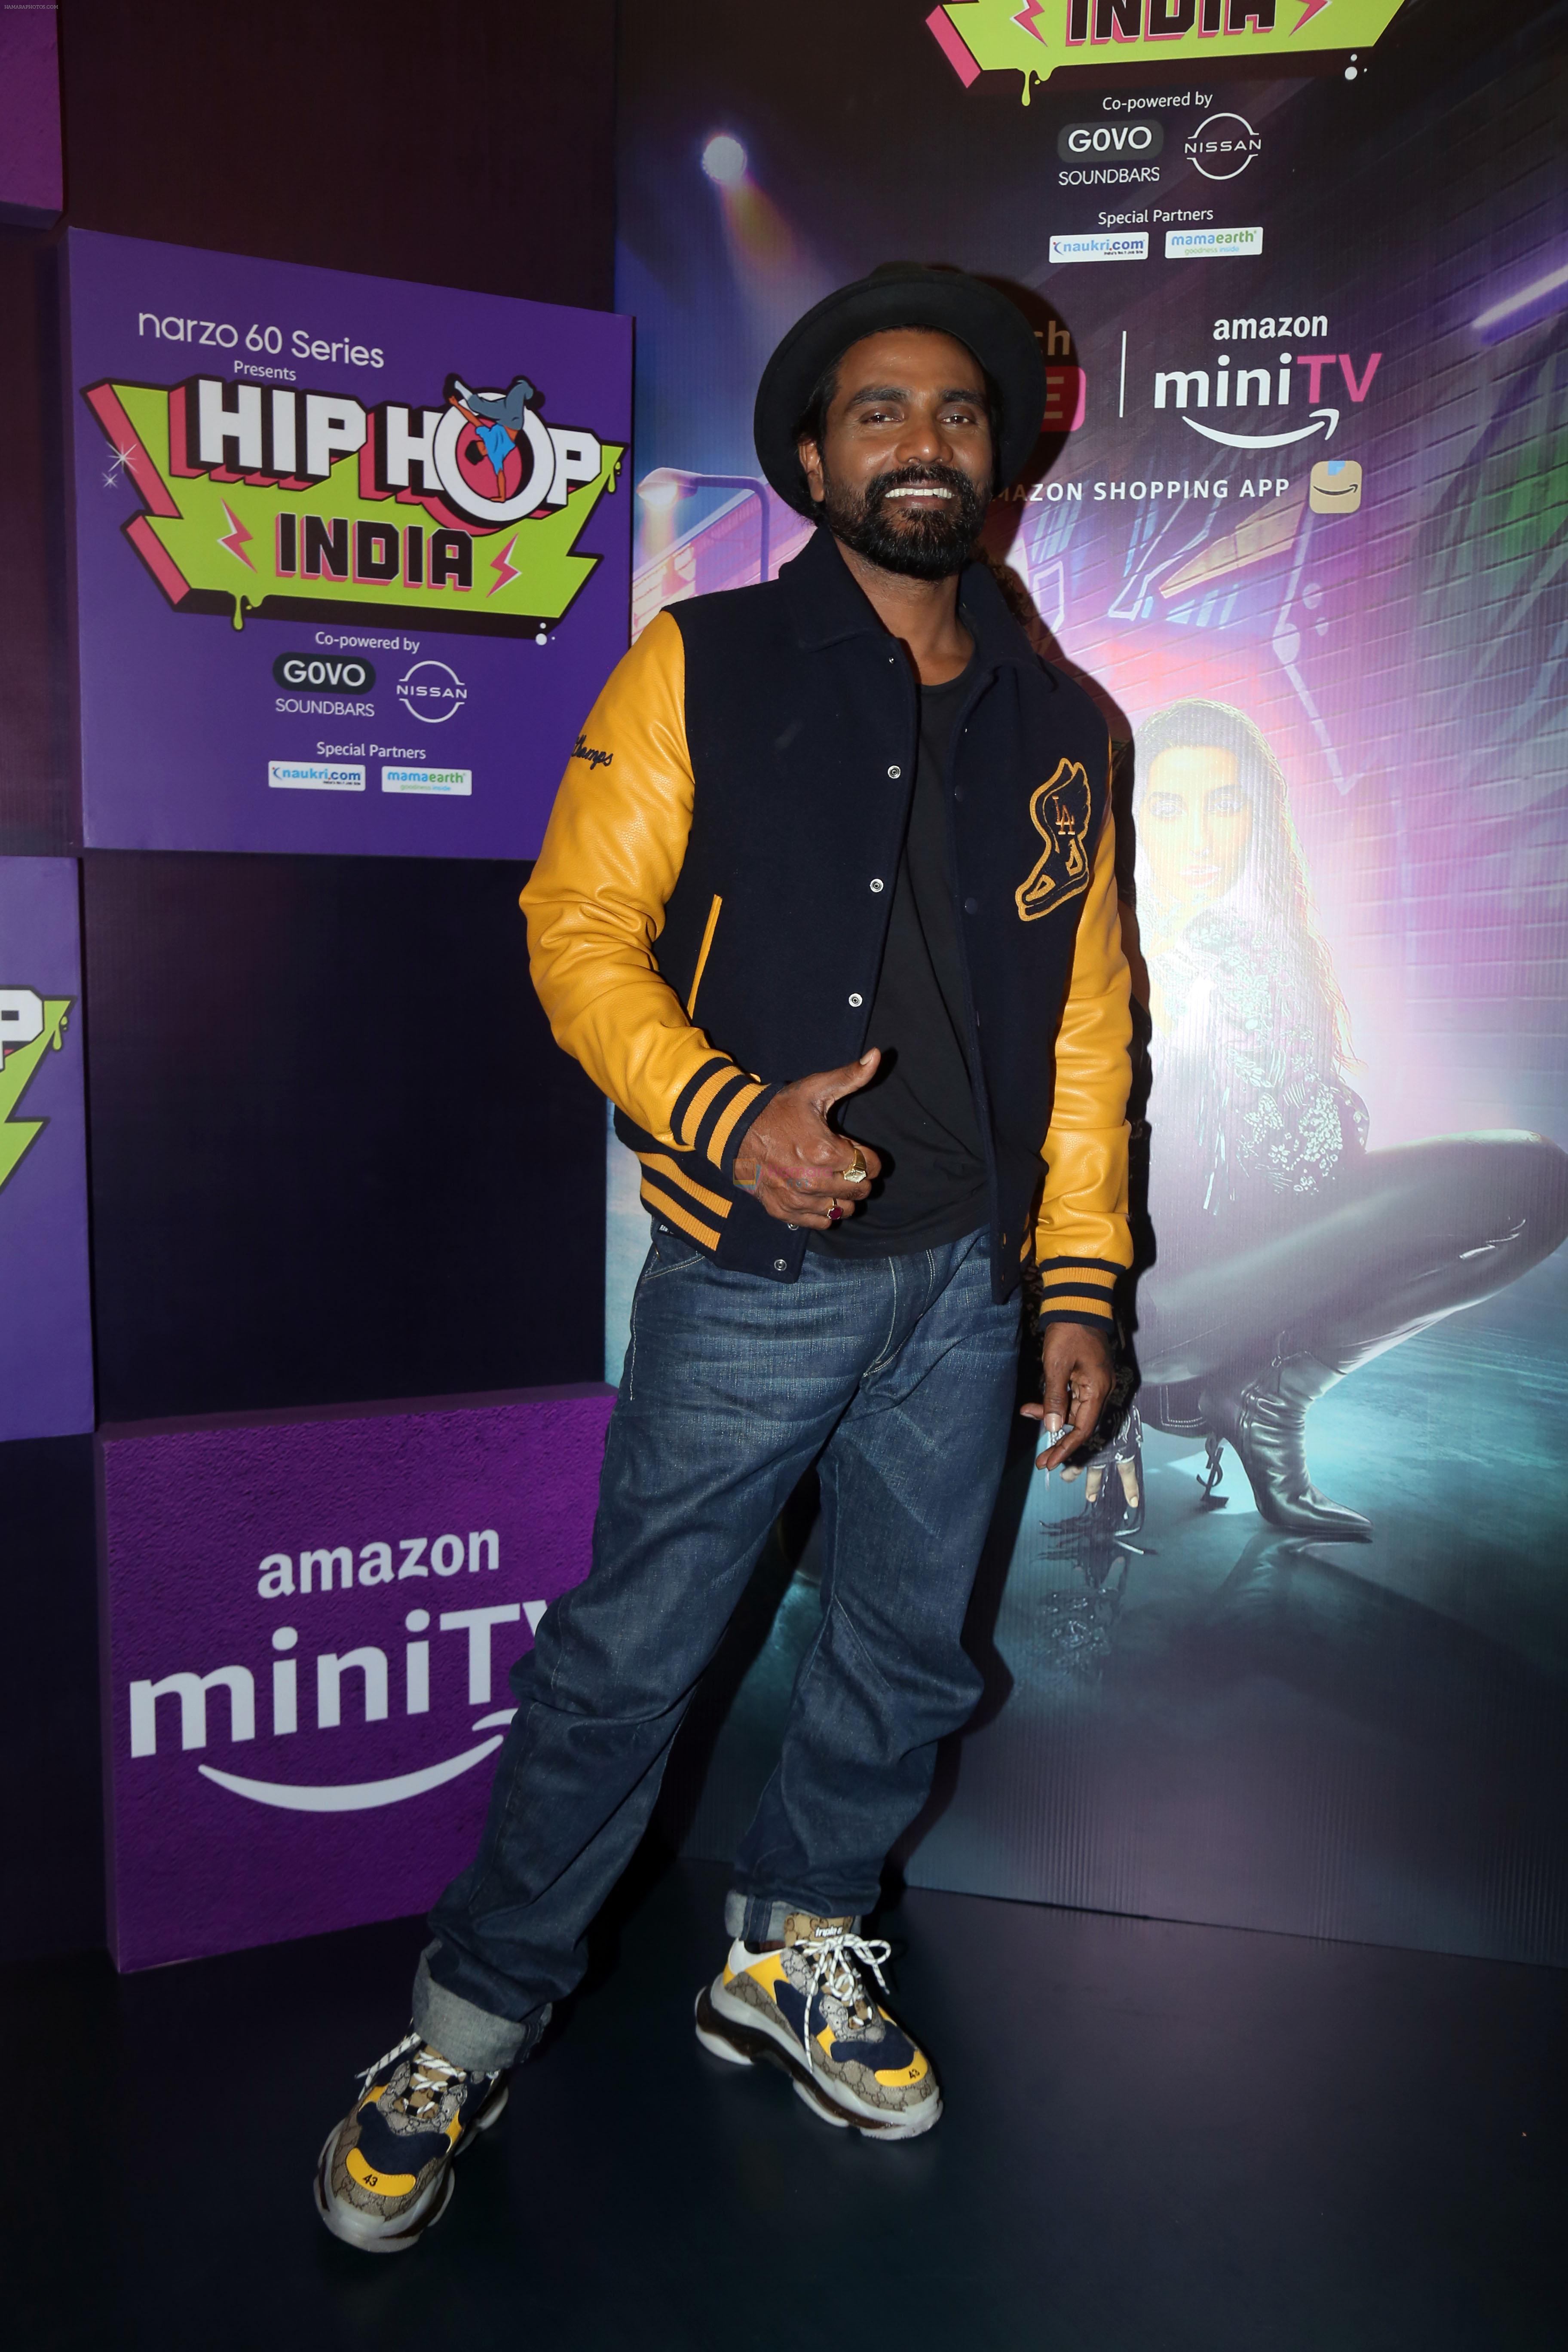 Remo D'souza promoting Reality Dance Show Hip Hop India at Novotel Juhu on 28 July 2023